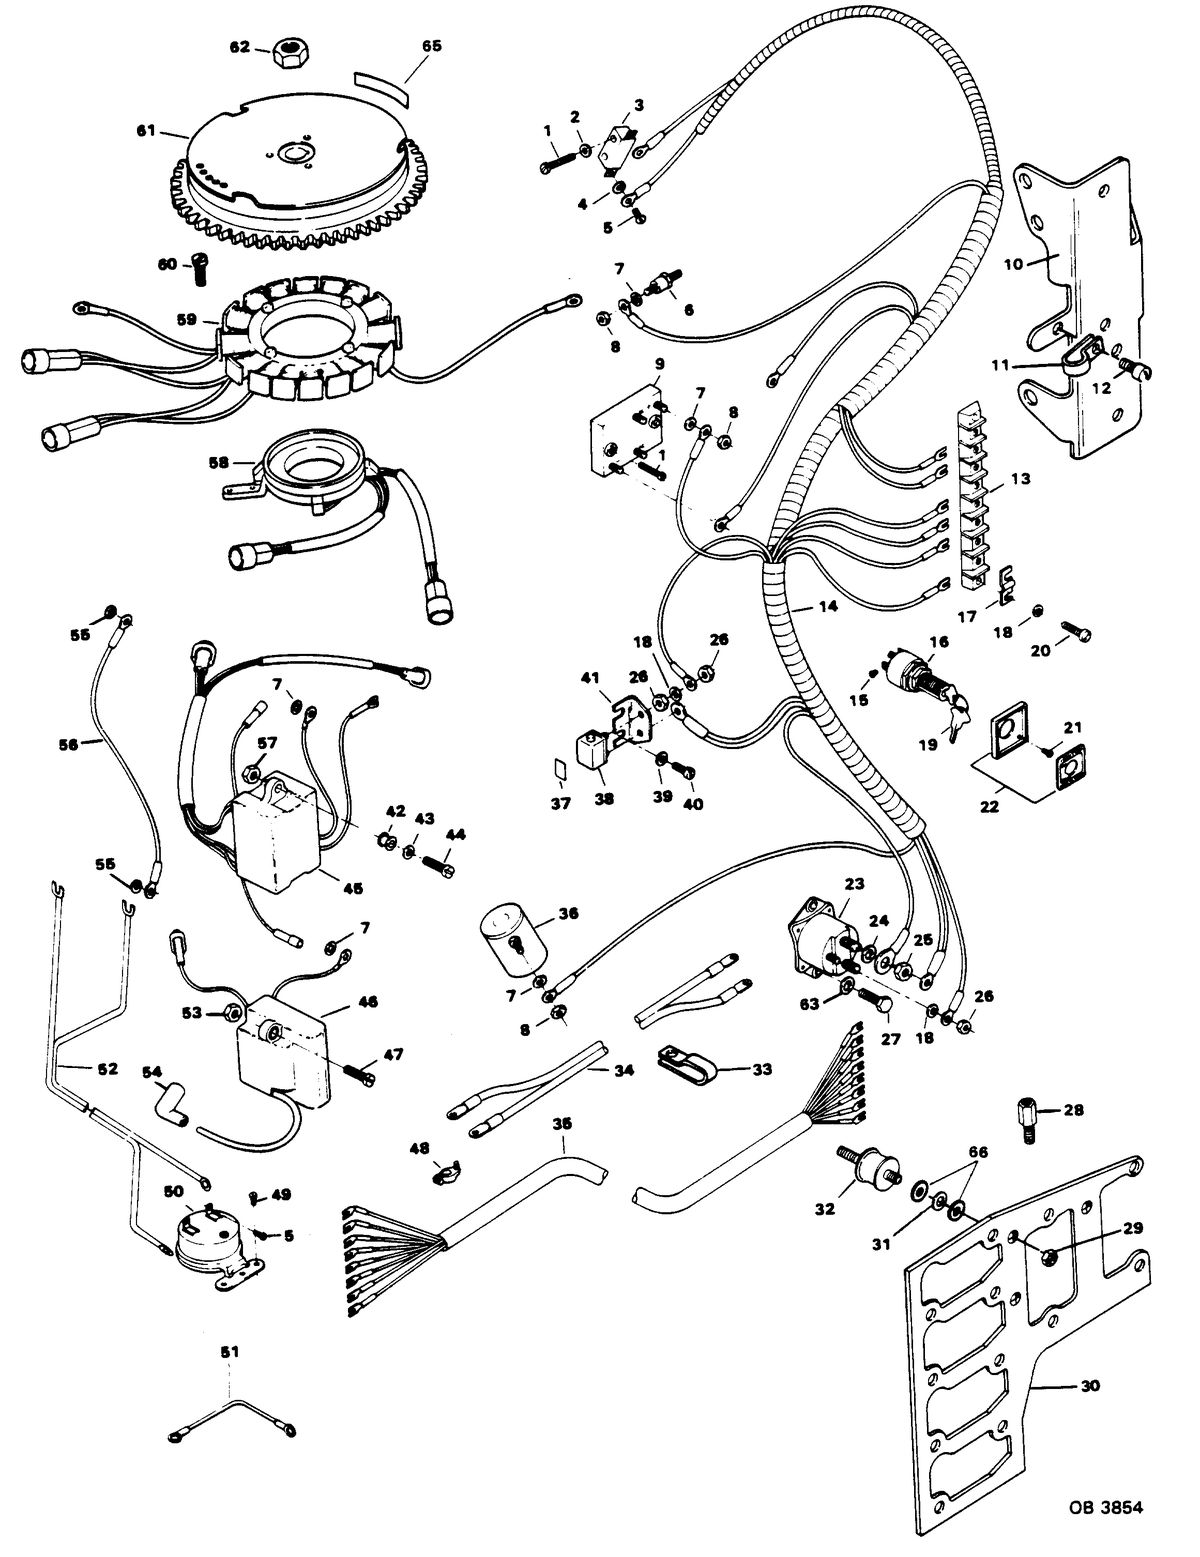 CHRYSLER 115 H.P. ELECTRICAL COMPONENTS